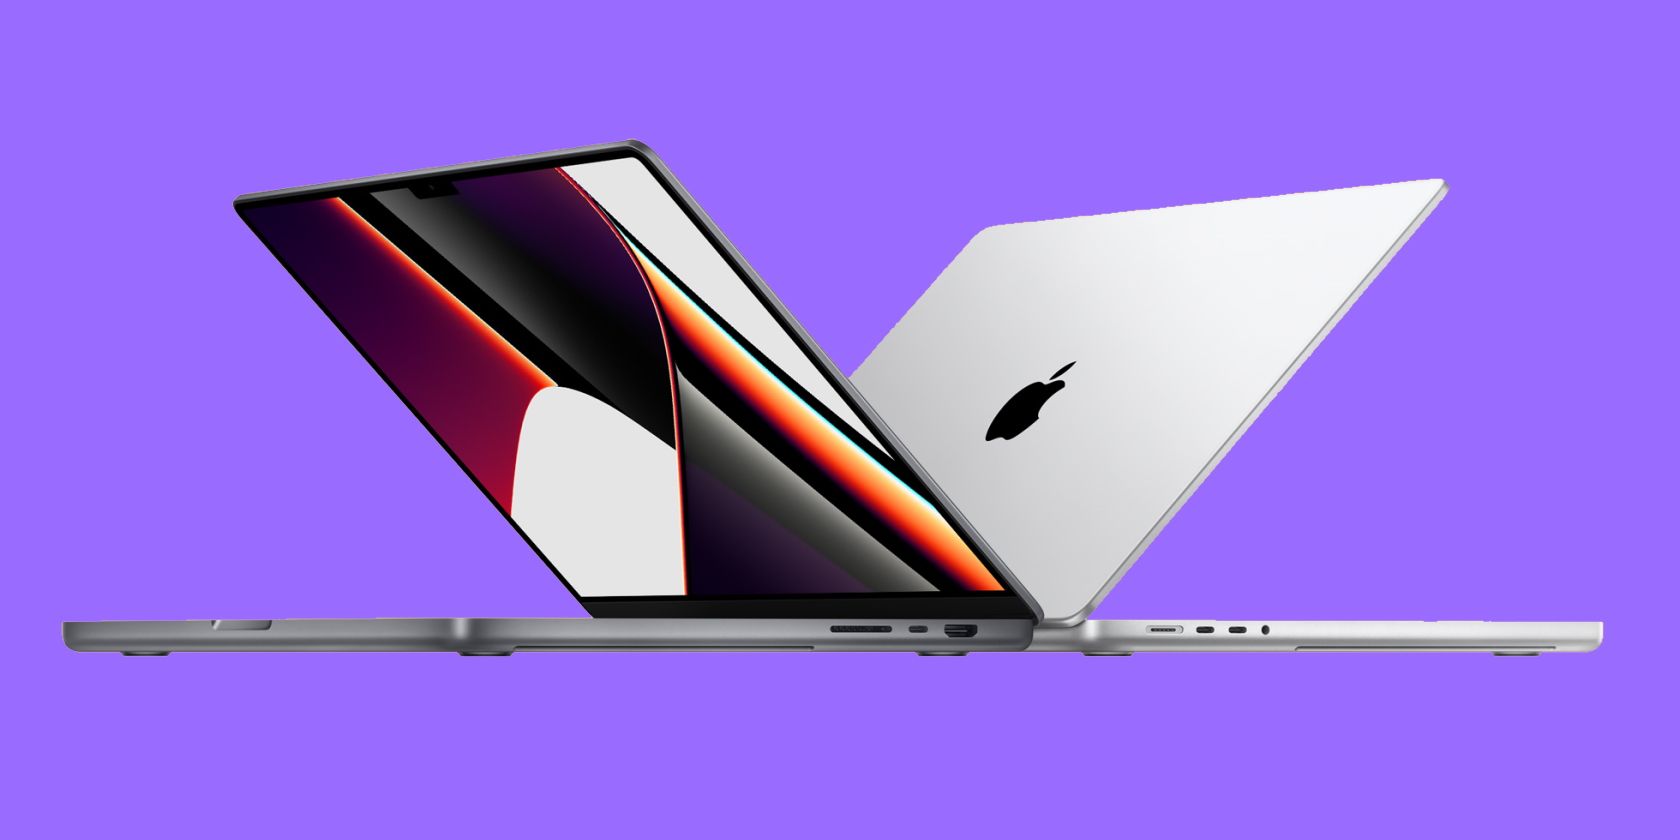 14-inch MacBook Pro with M1 Pro chip